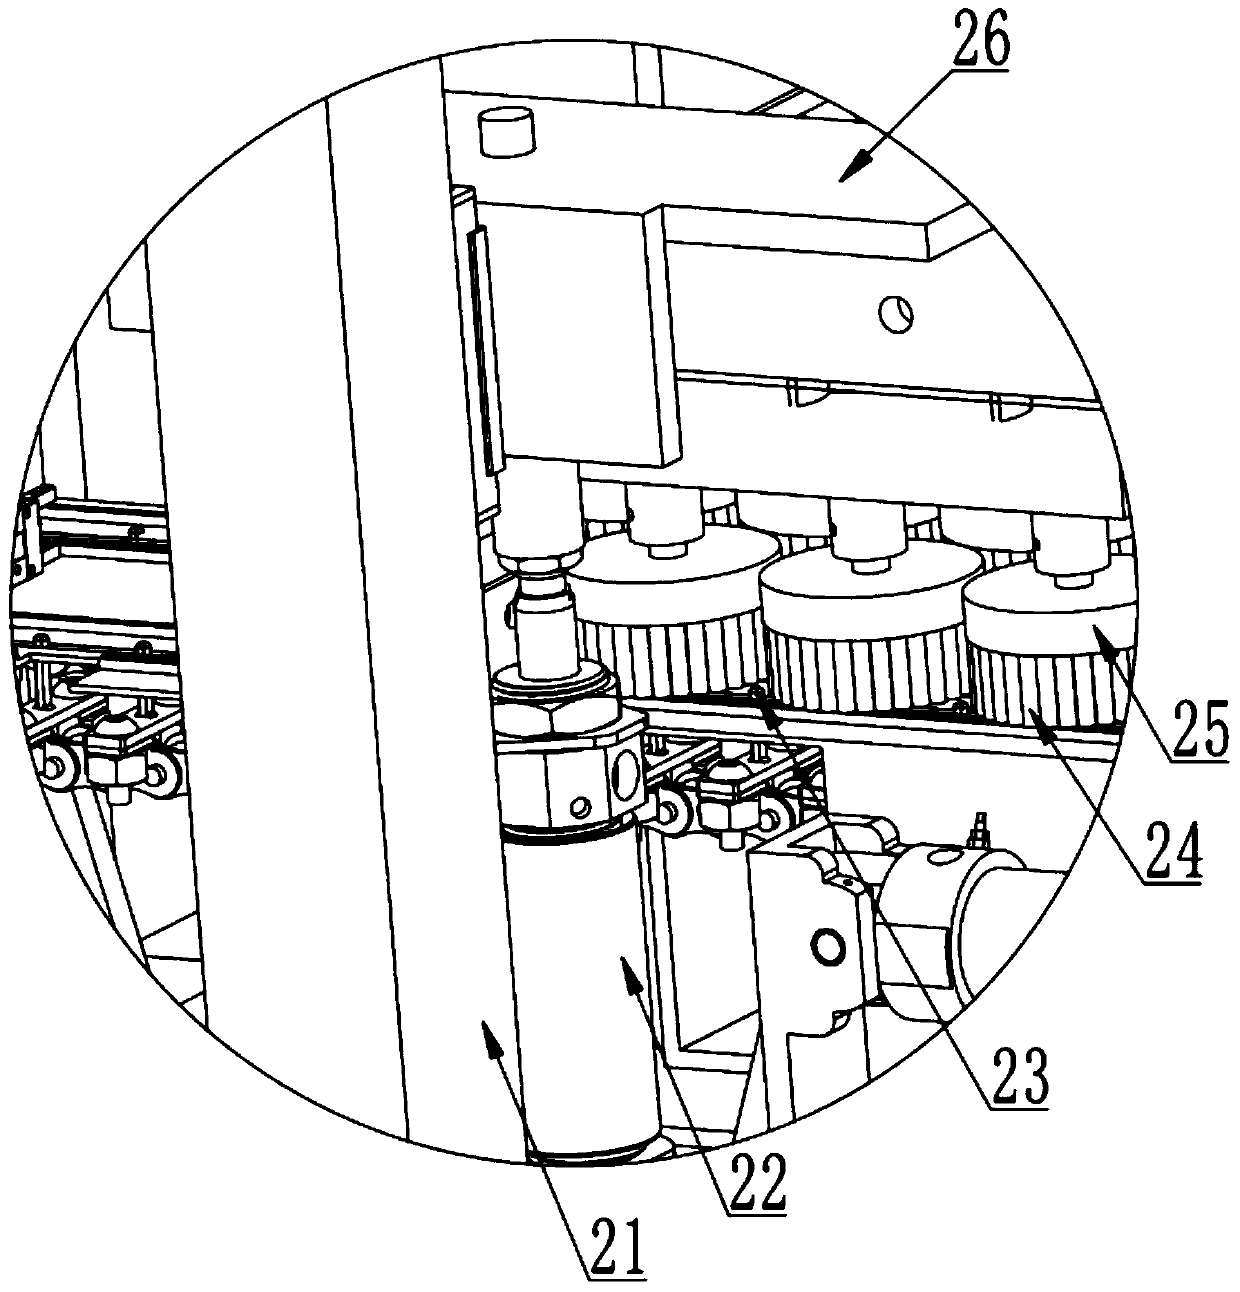 Double-side deburring device